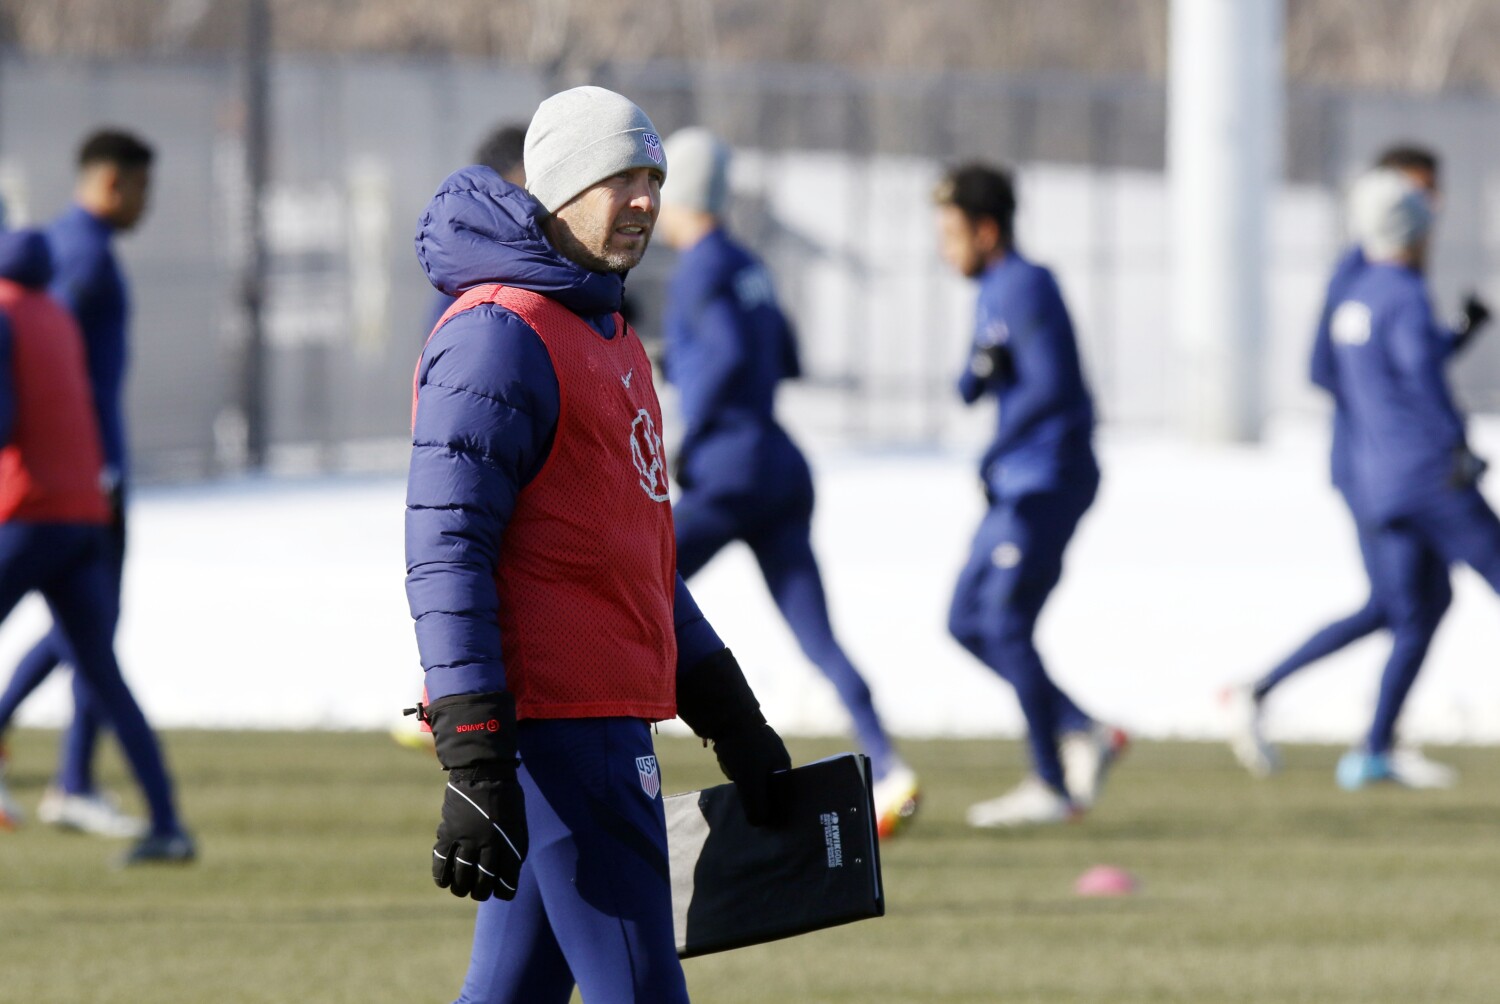 USMNT prepares for scorching World Cup with qualifiers in frigid temperatures